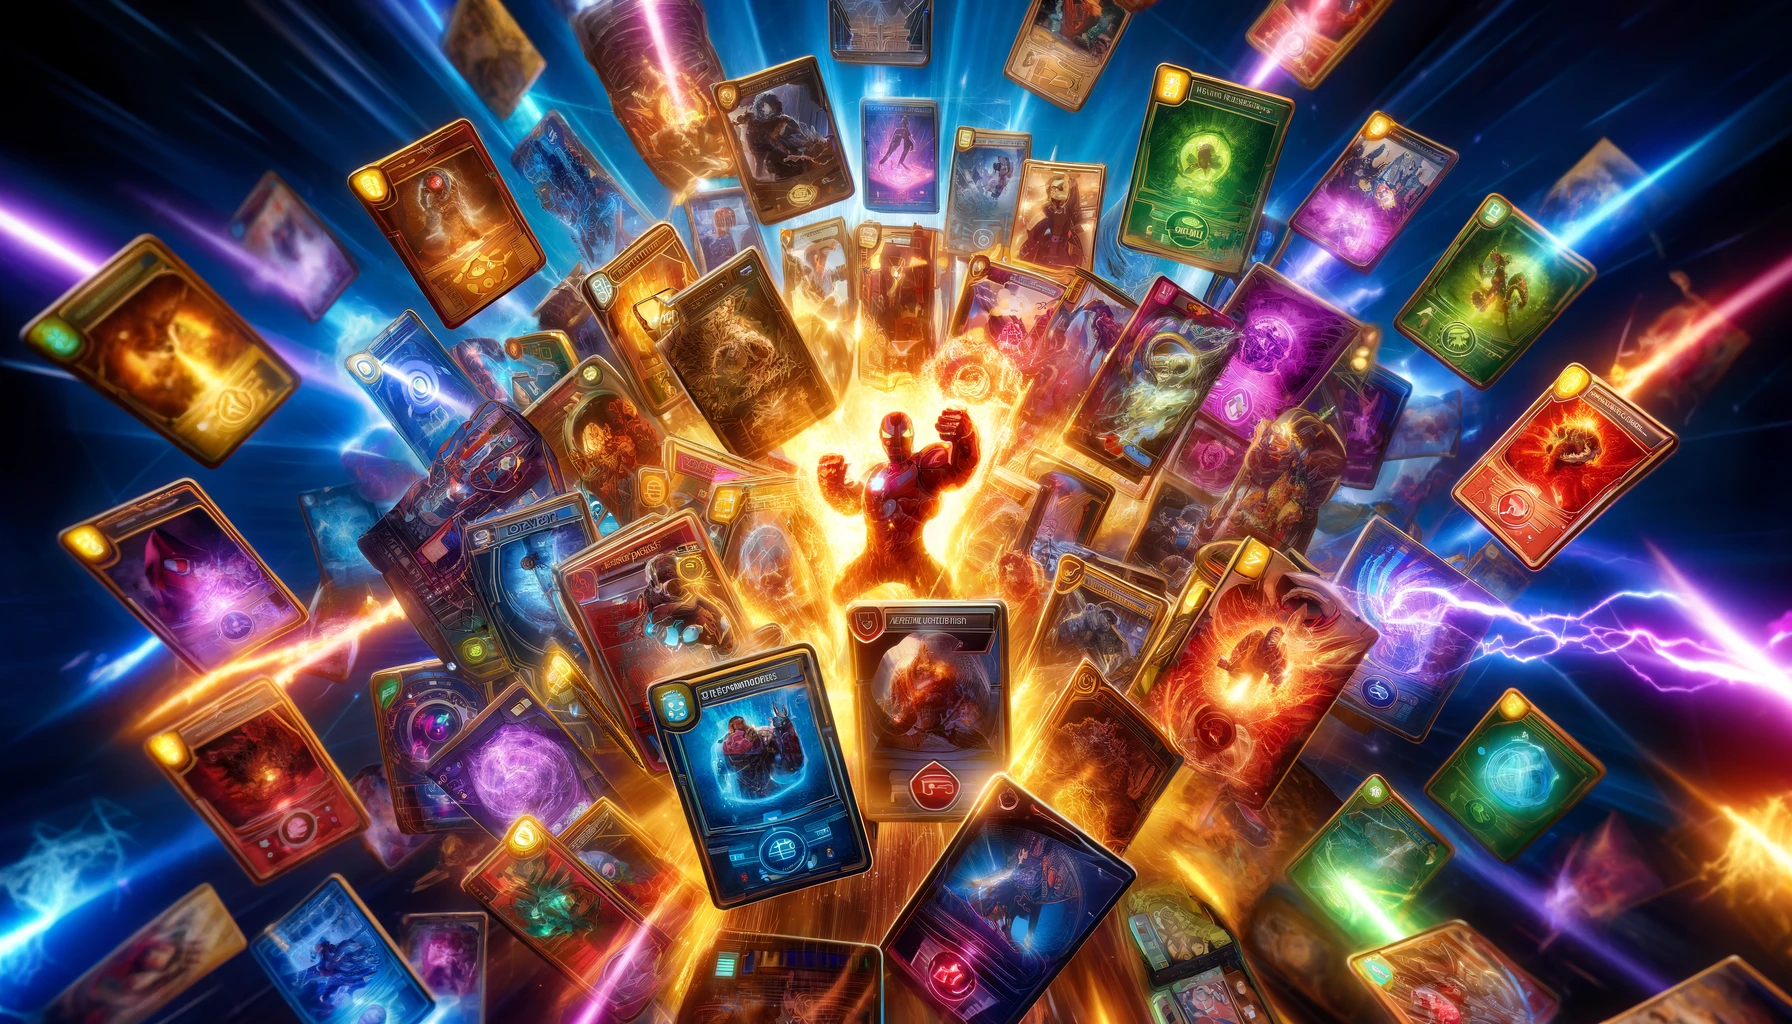 A wide-format image showing Marvel Snap's Card Caches and Reserves. Marvel cards glow with energy as they emerge from treasure-like caches, representing superheroes and villains. Indicators highlight random rewards like rare cards, credits, and resources, illustrating excitement and unpredictability.